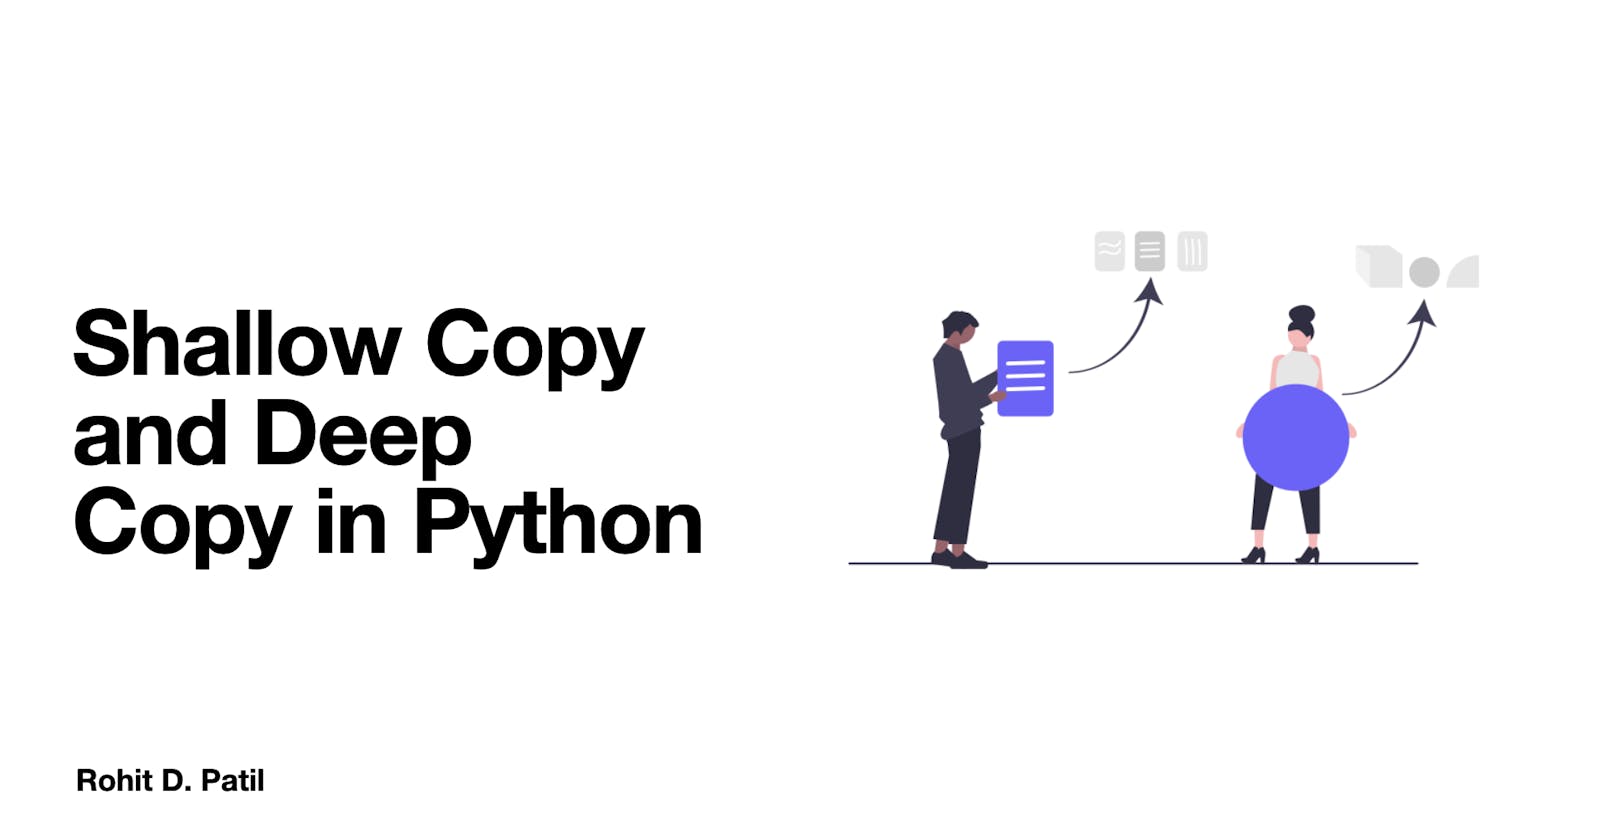 Shallow Copy and Deep Copy in Python